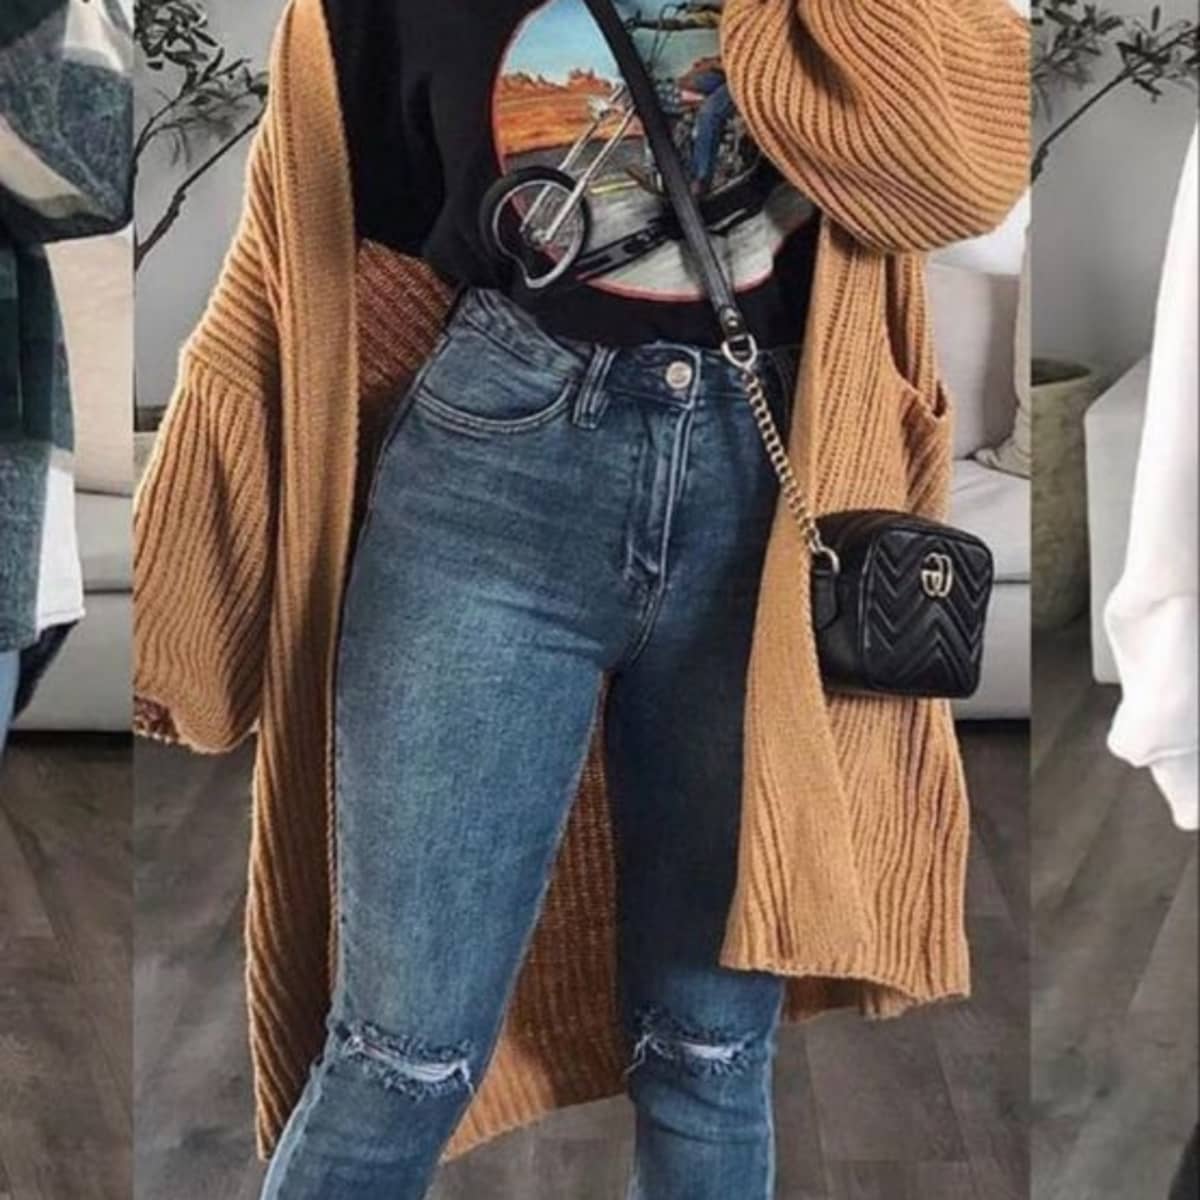 23 Ideas For Fall Outfits That Every Girl Needs For Her Wardrobe  Trendy  outfits winter, Trendy fall outfits, Fall photo shoot outfits